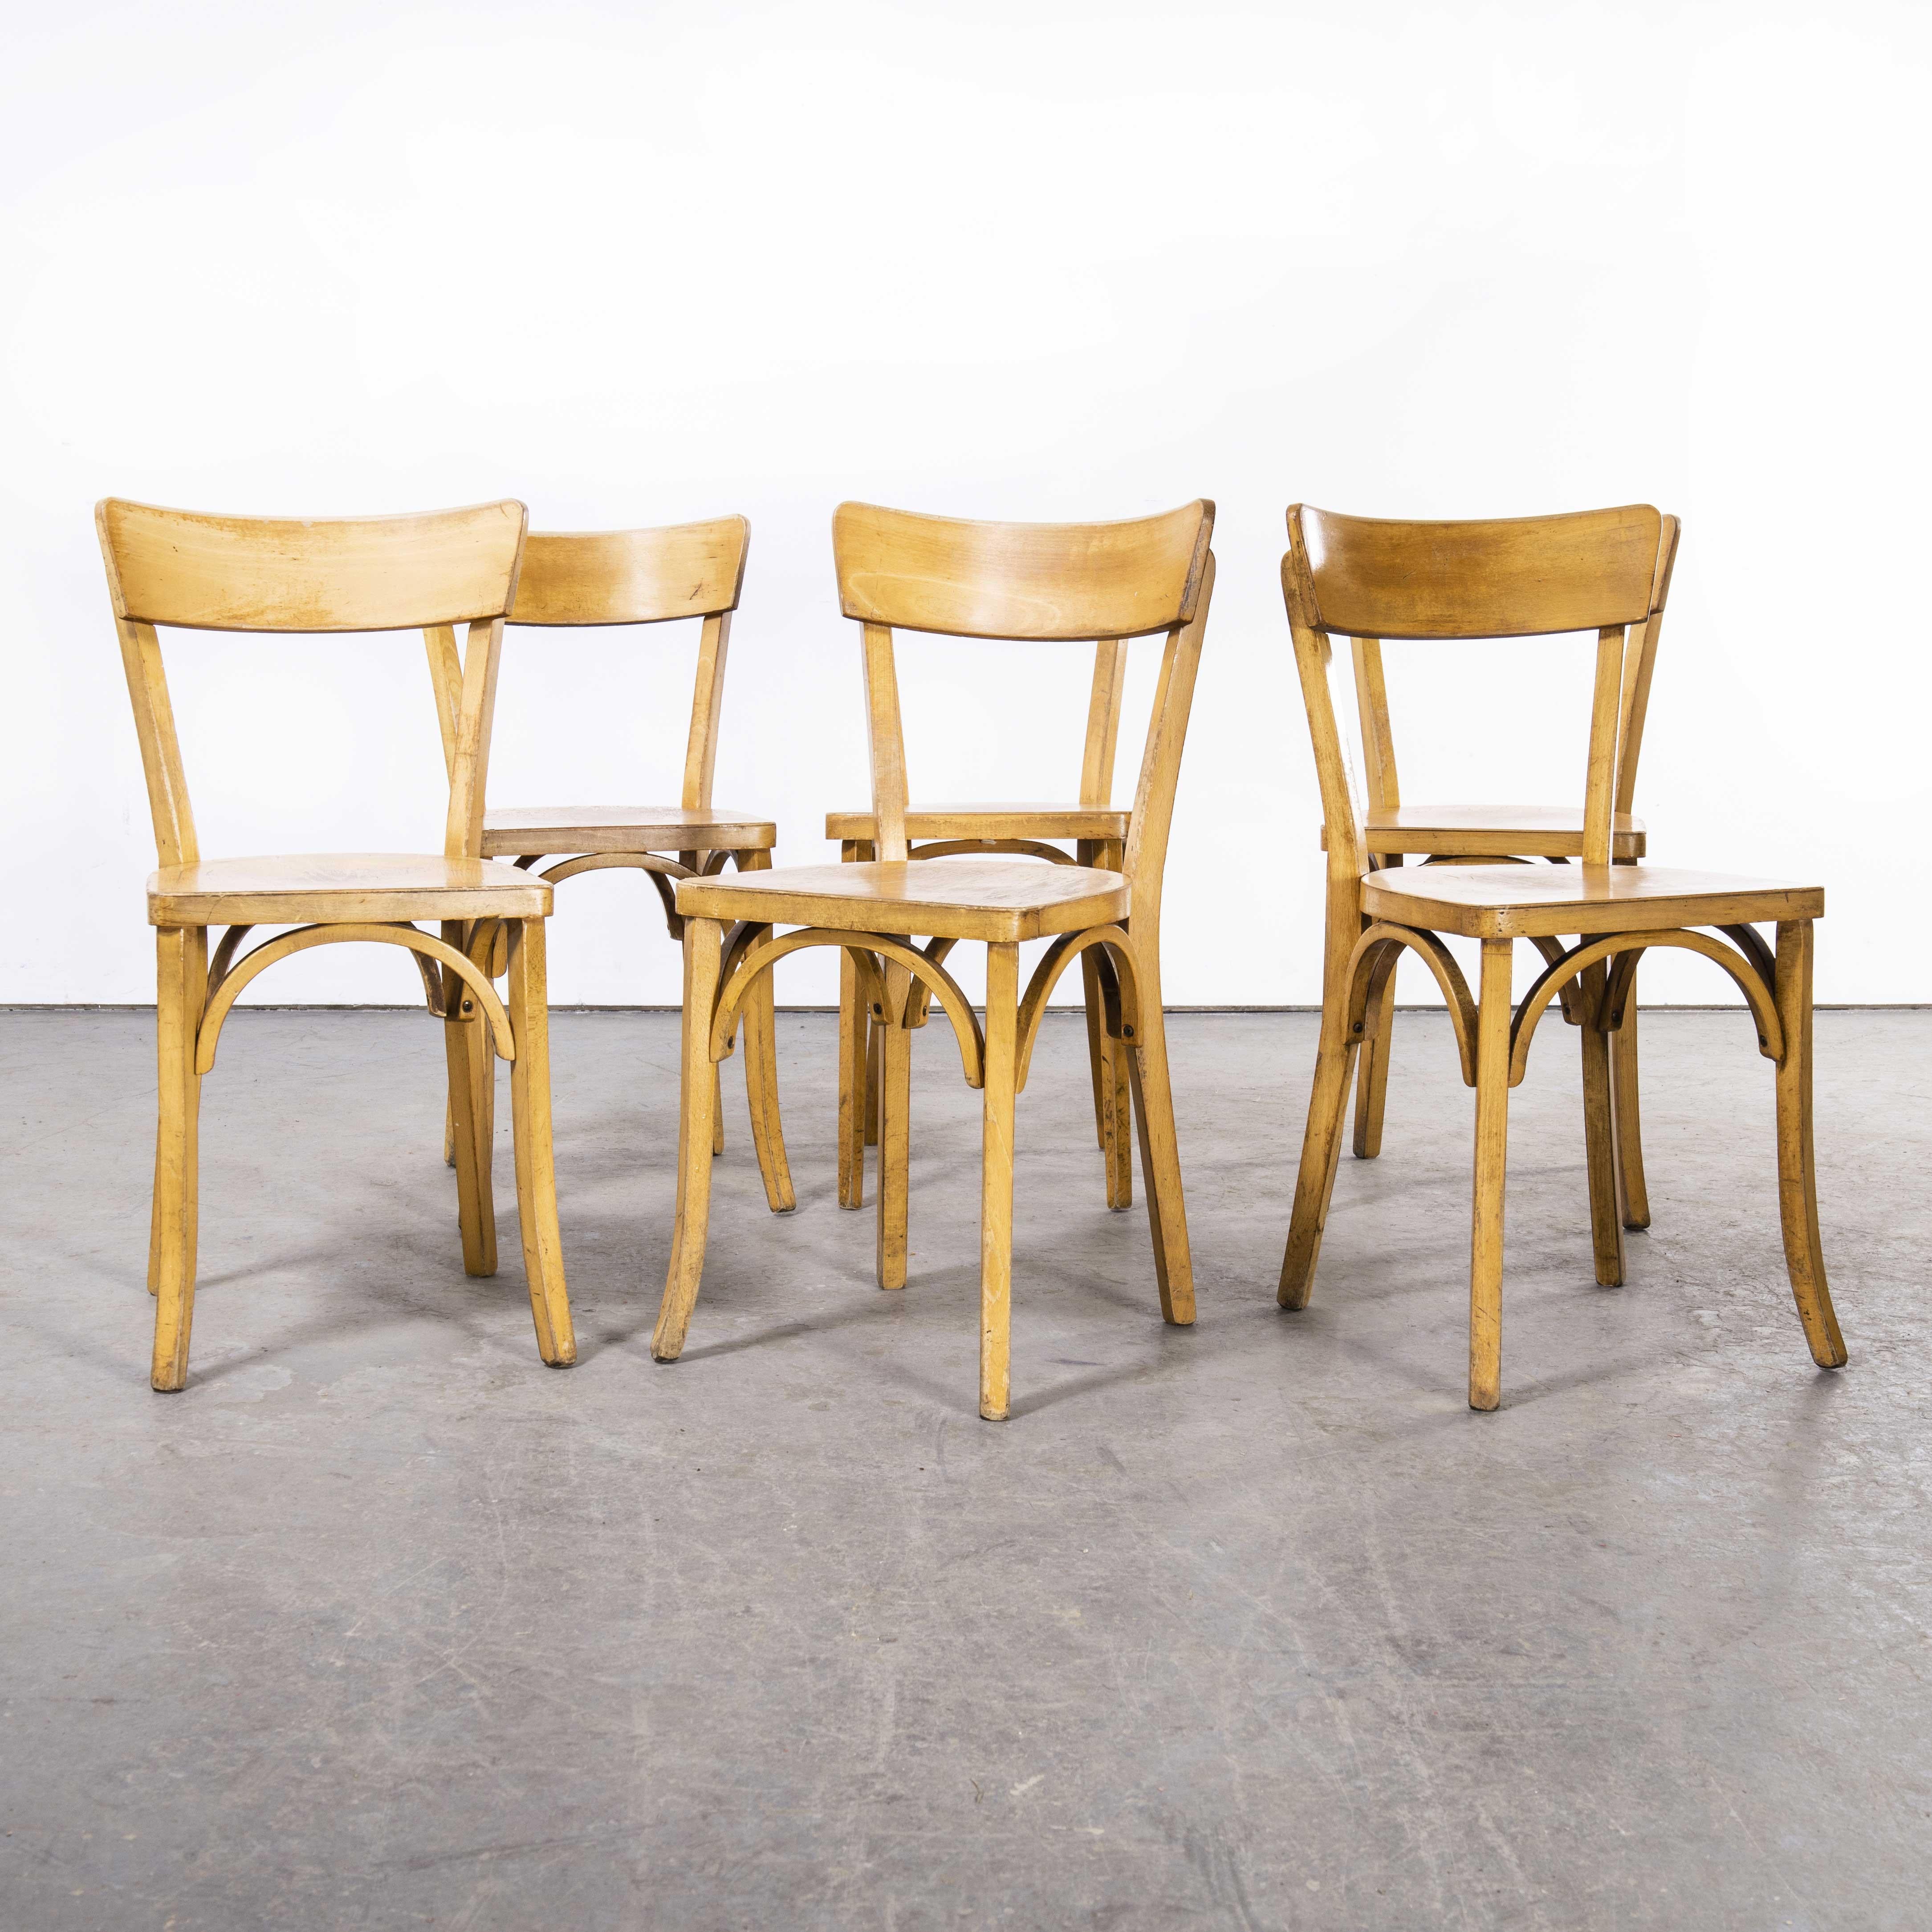 1950's French Baumann Blonde Slim Back Bentwood Chairs, Harlequin Set of Six For Sale 2